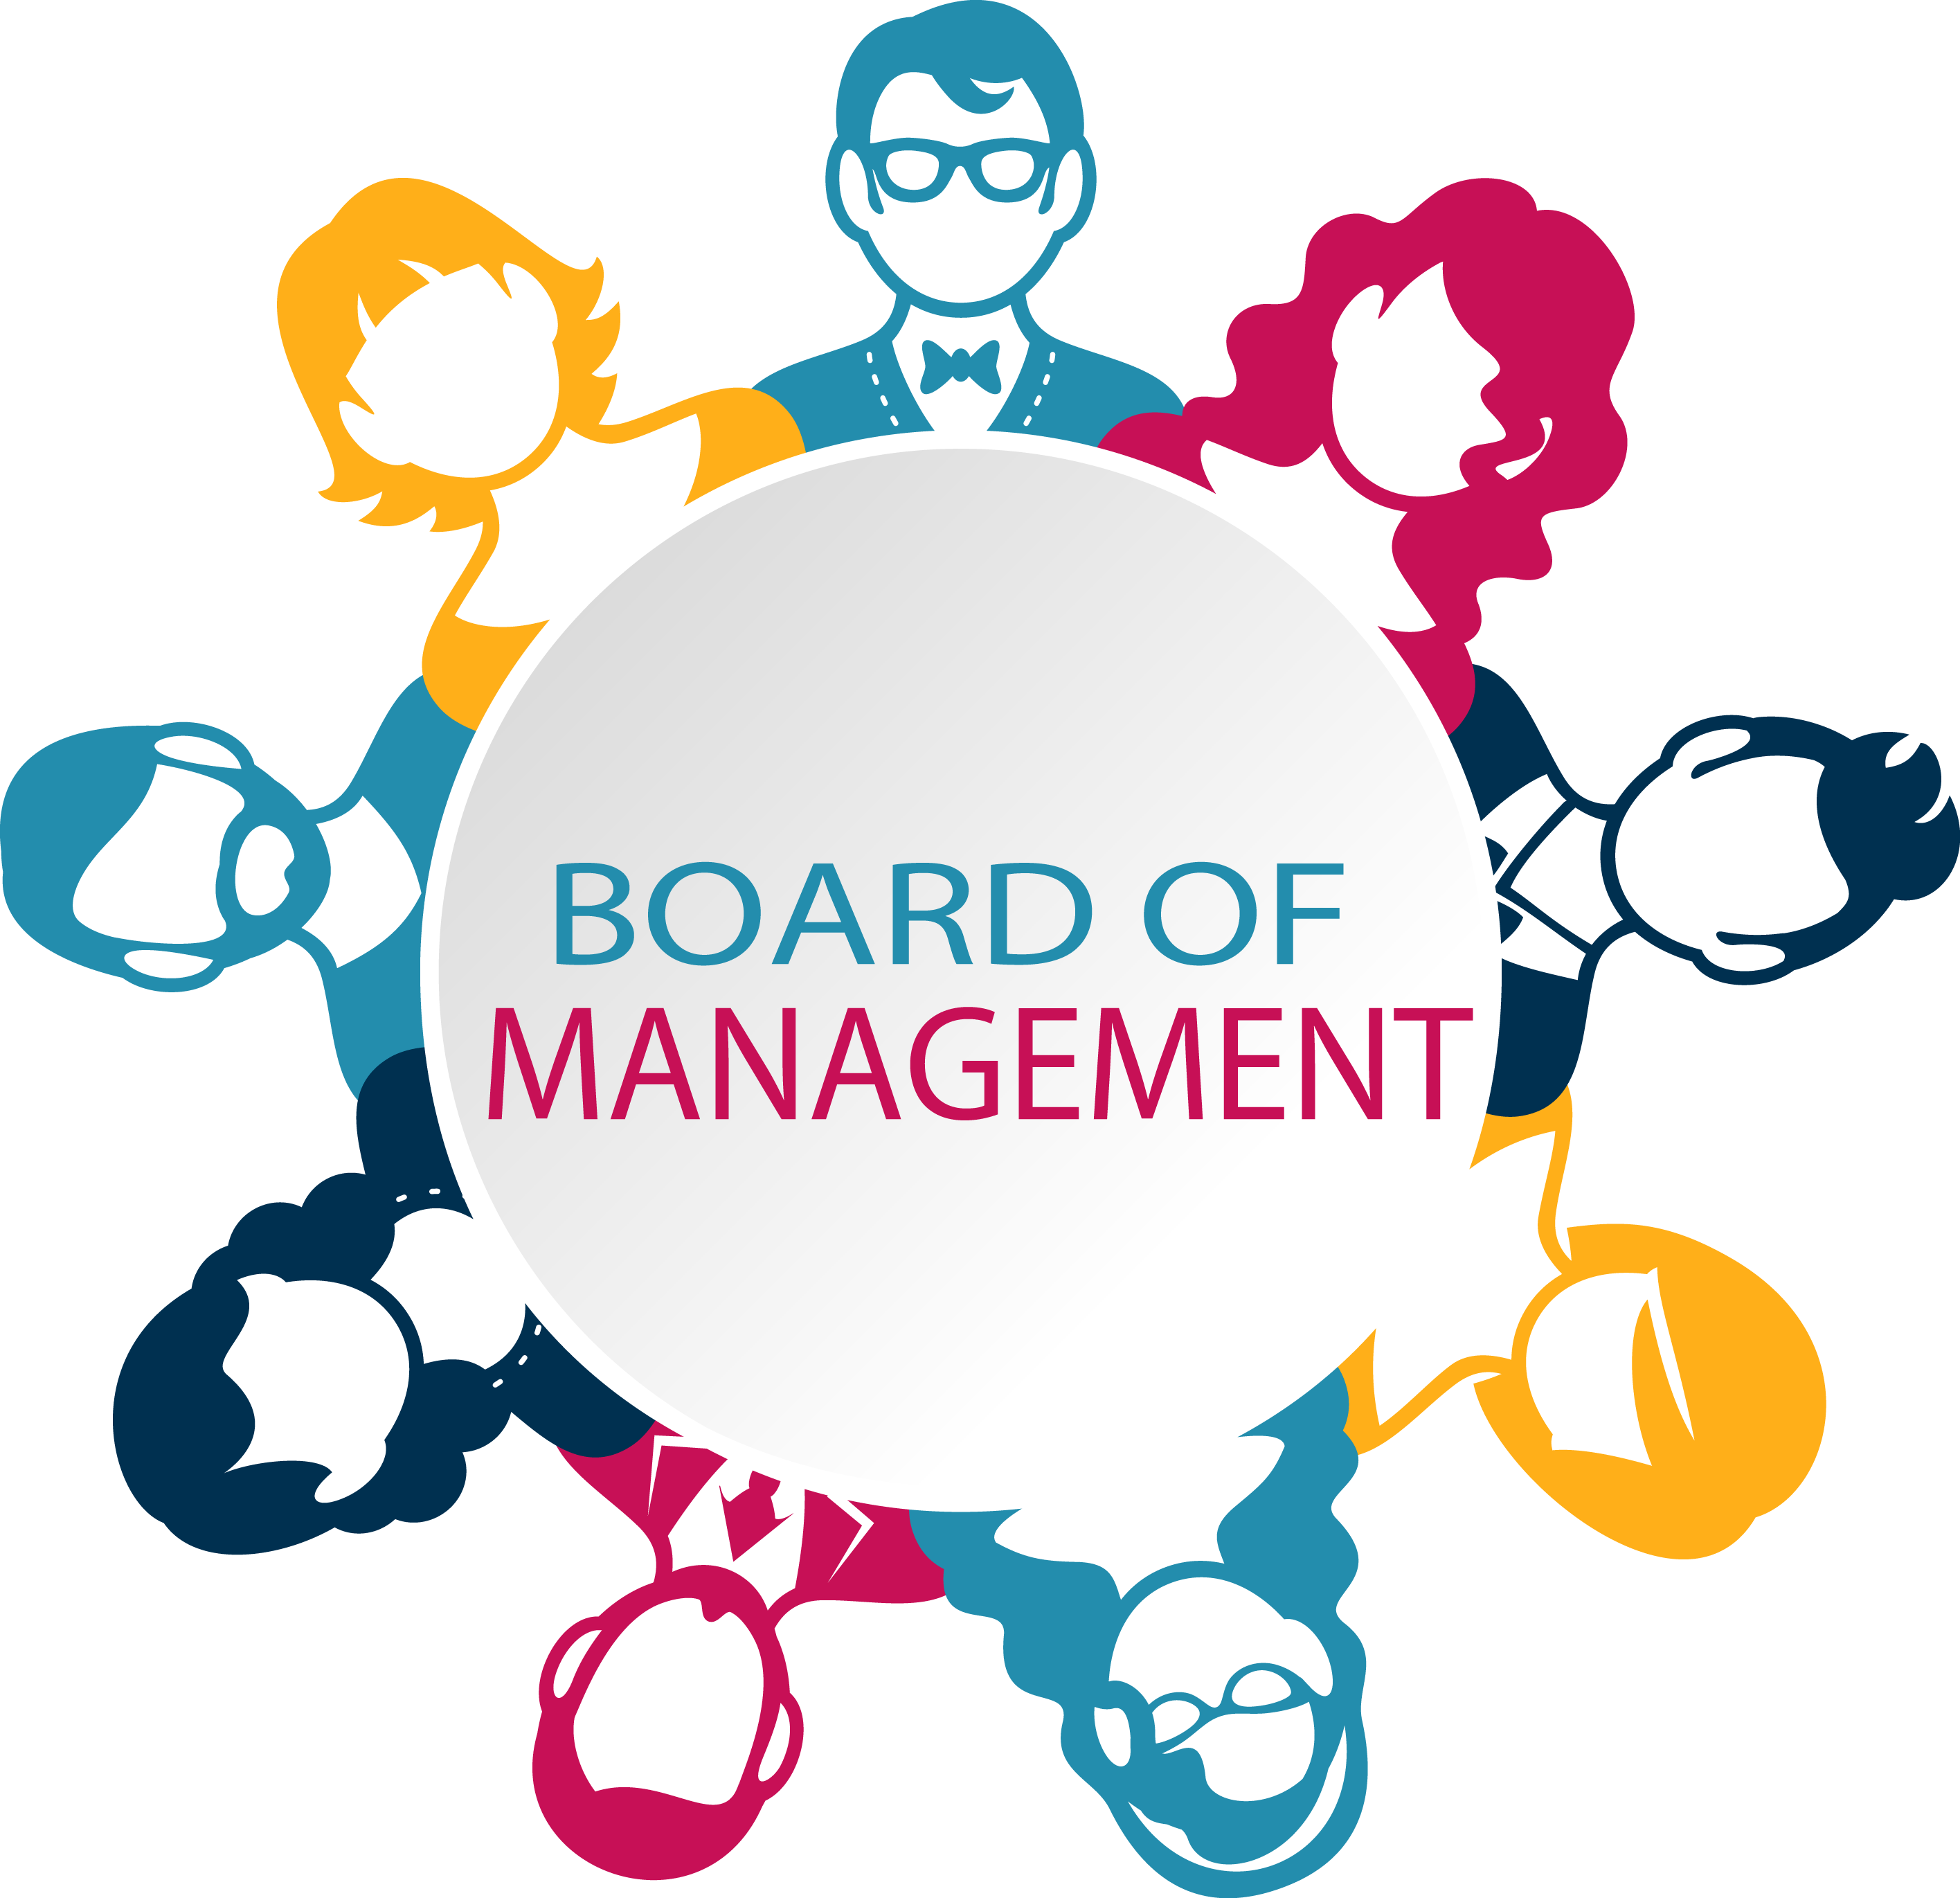 board of management trong tiếng Anh